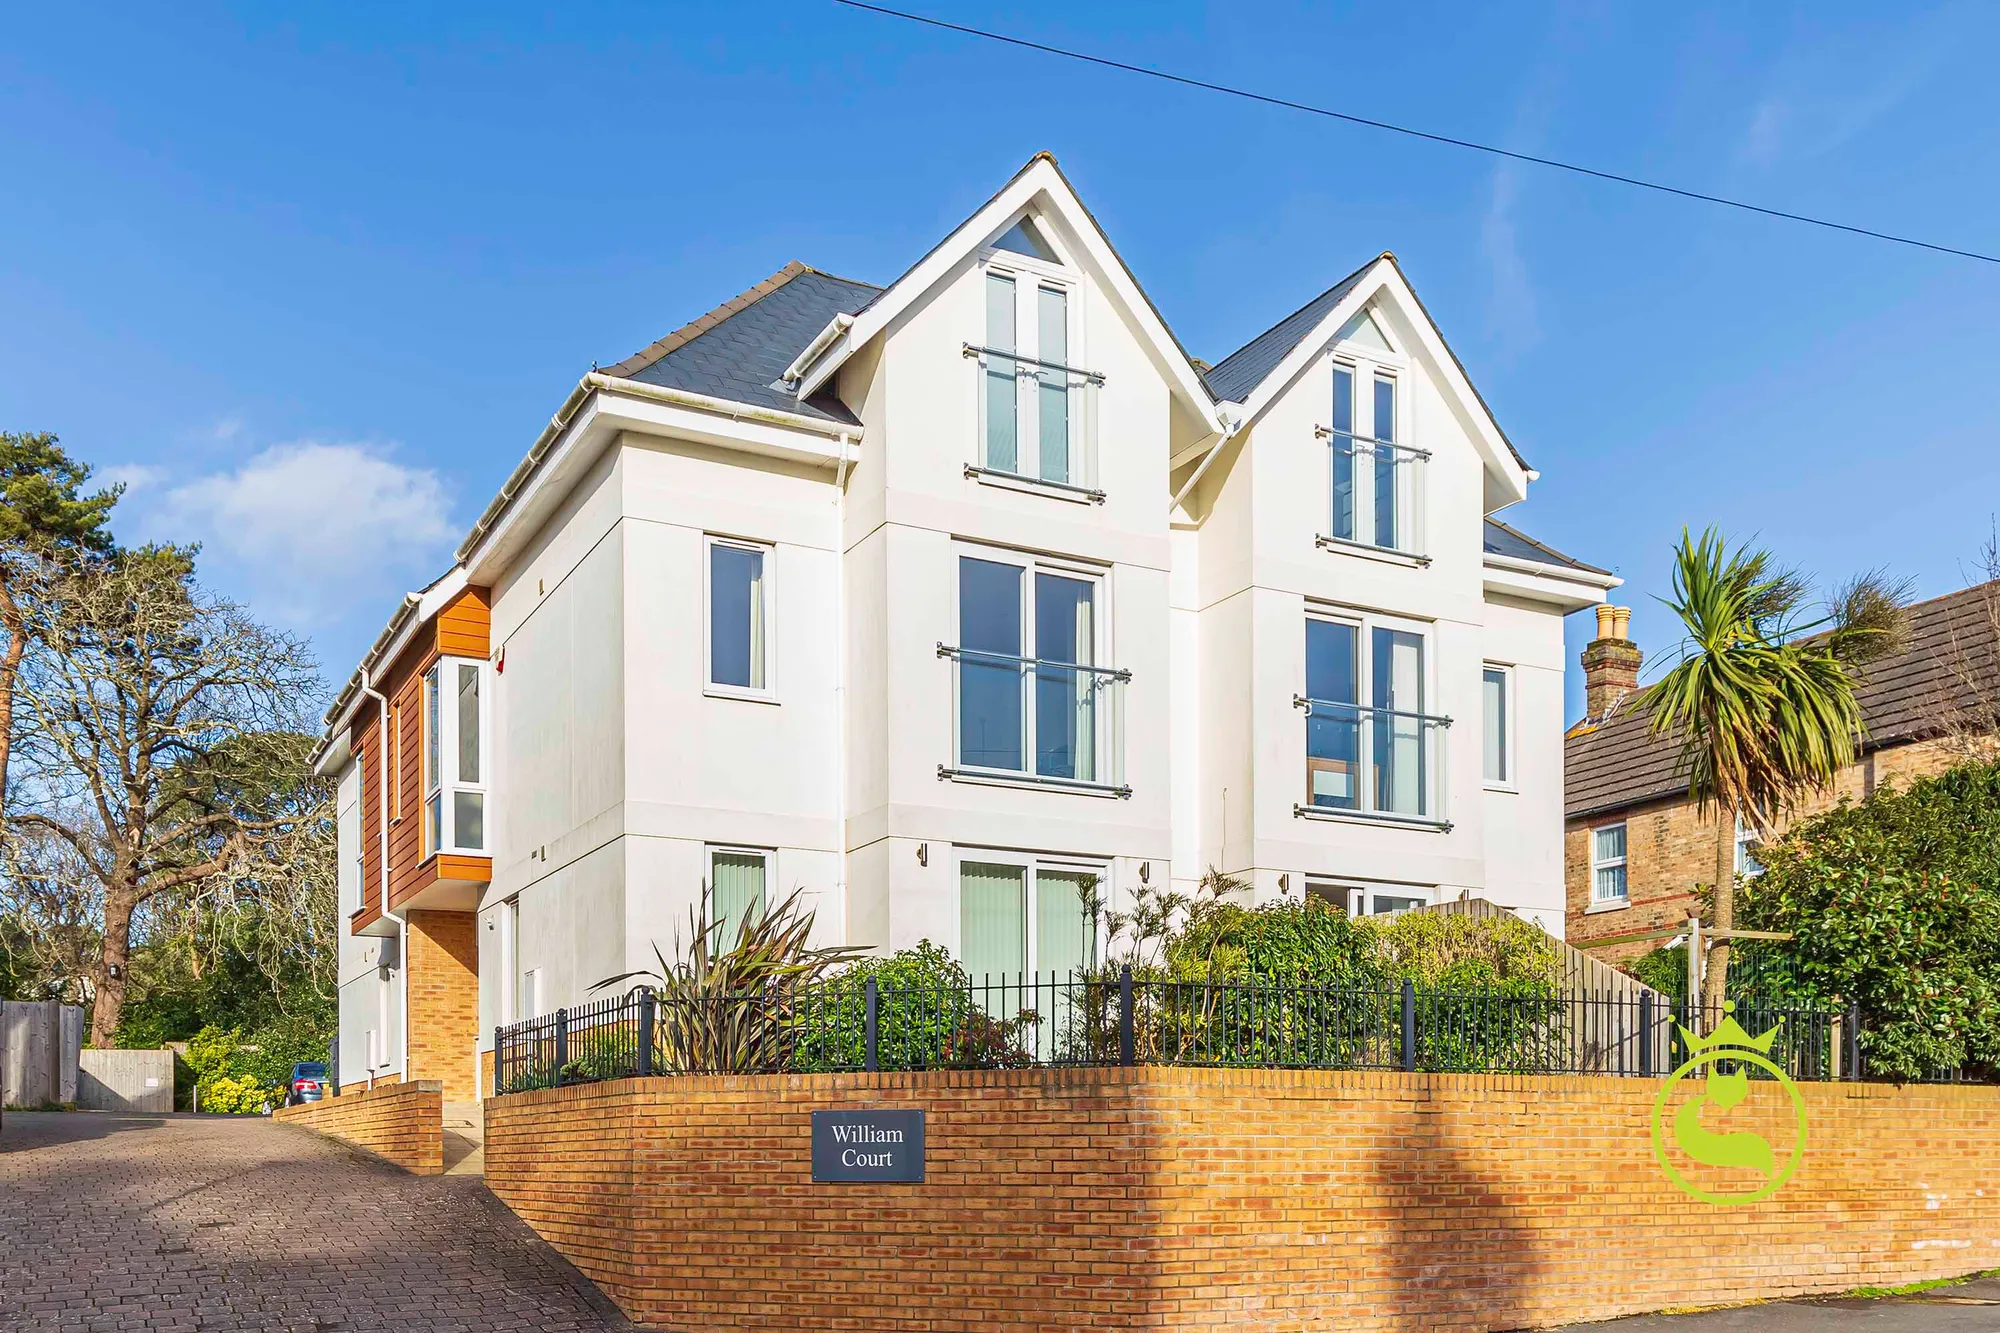 4 bed semi-detached house for sale in Sandringham Road, Poole - Property Image 1